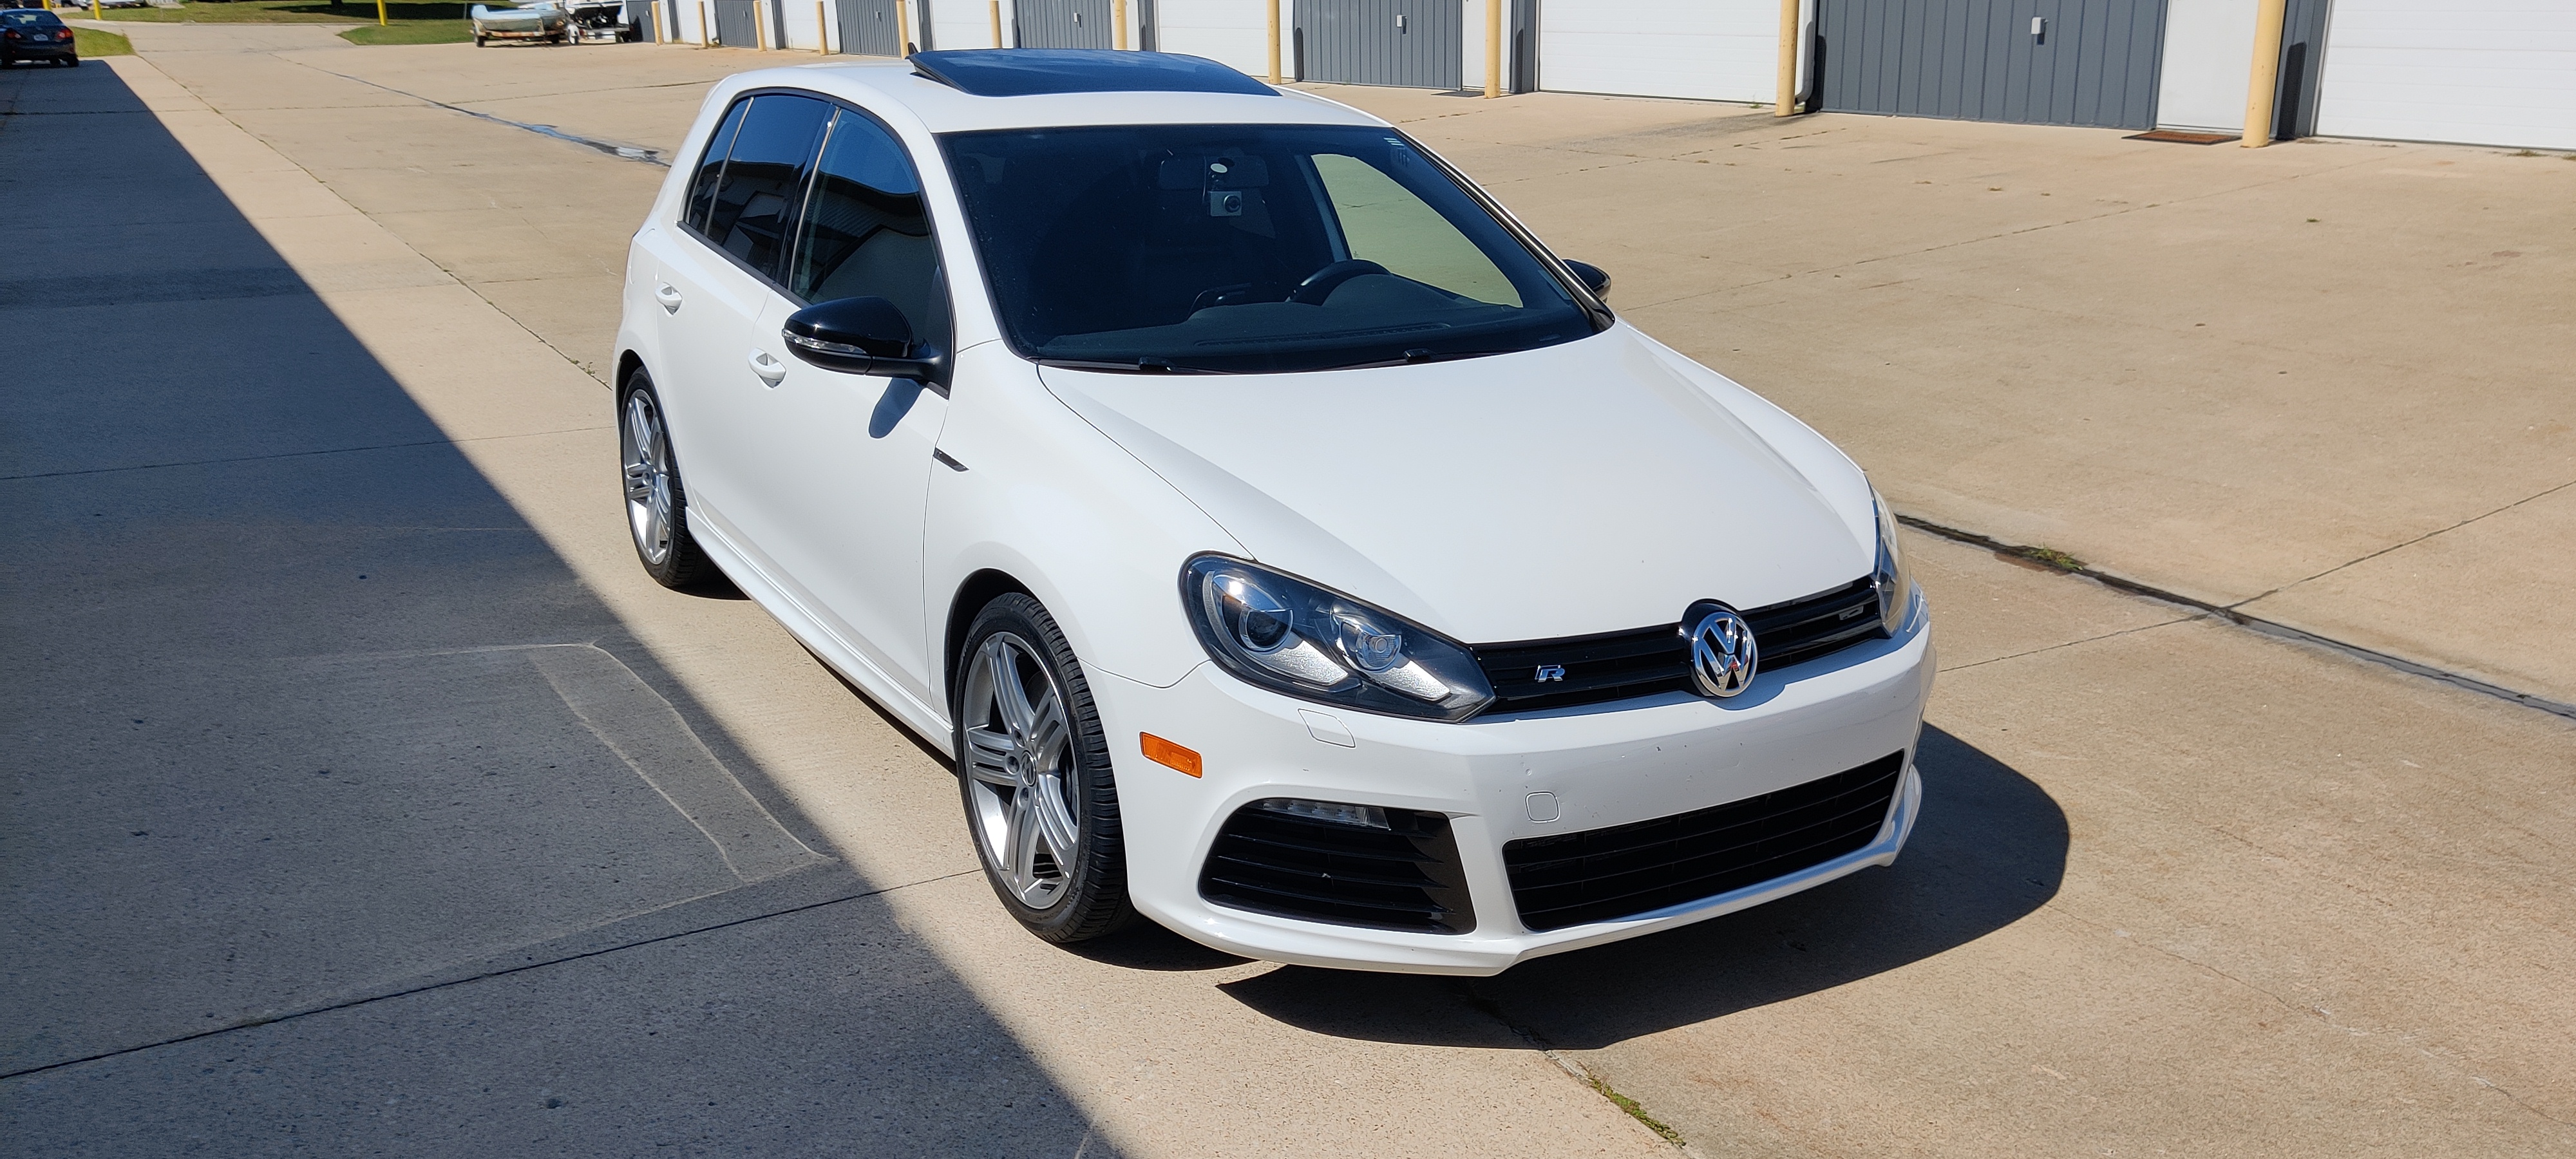 Used 2012 Volkswagen Golf R for Sale Near Me | Cars.com